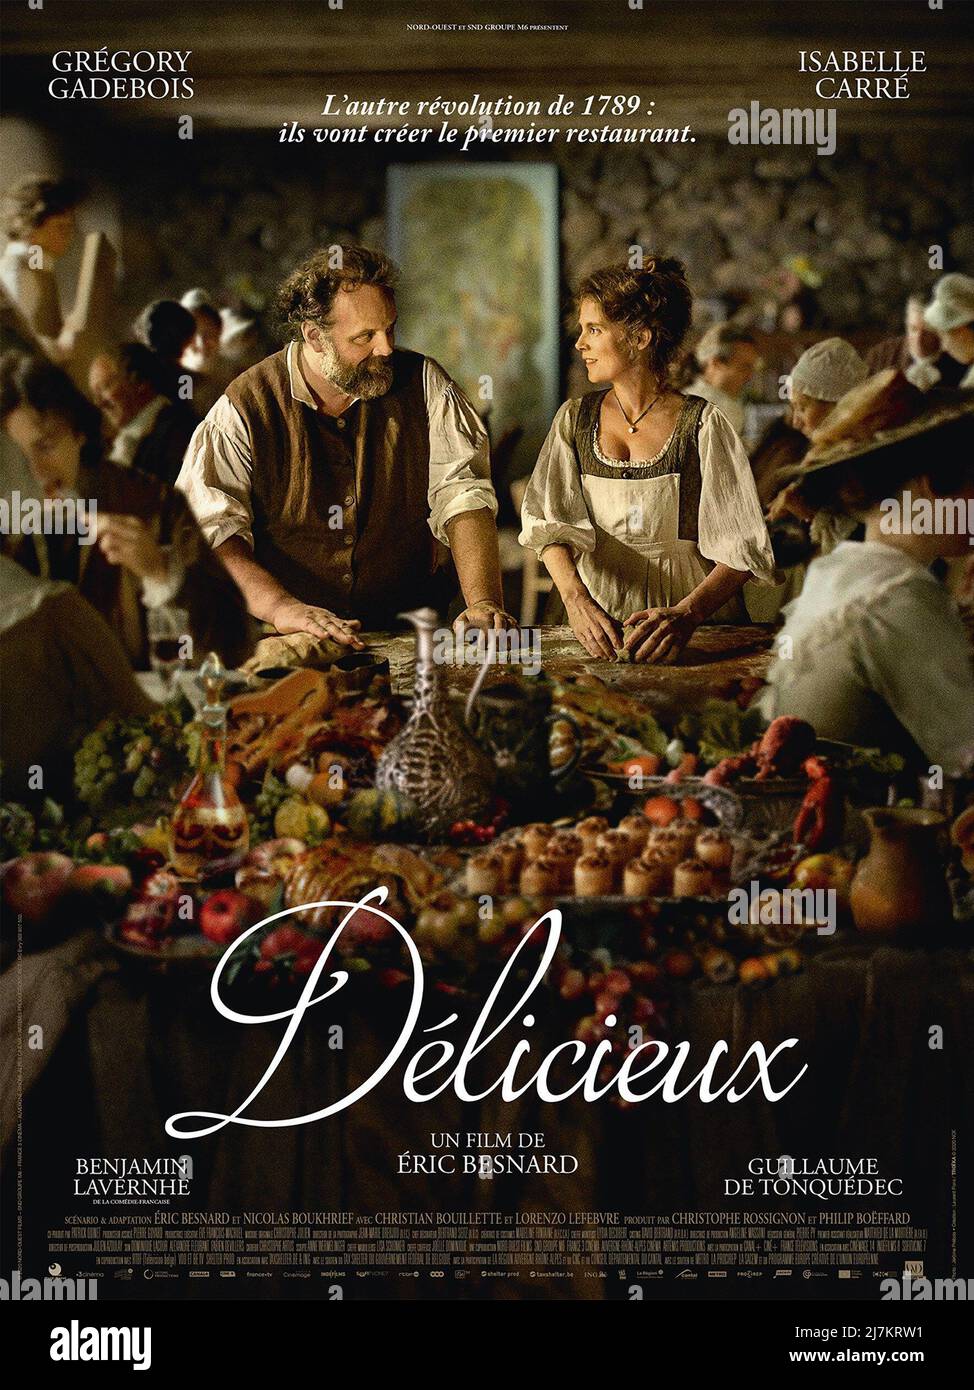 Delicieux anno : 2021 Francia / Belgio Direttore : Eric Besnard Isabelle Carré, poster francese Gregory Gadebois Foto Stock